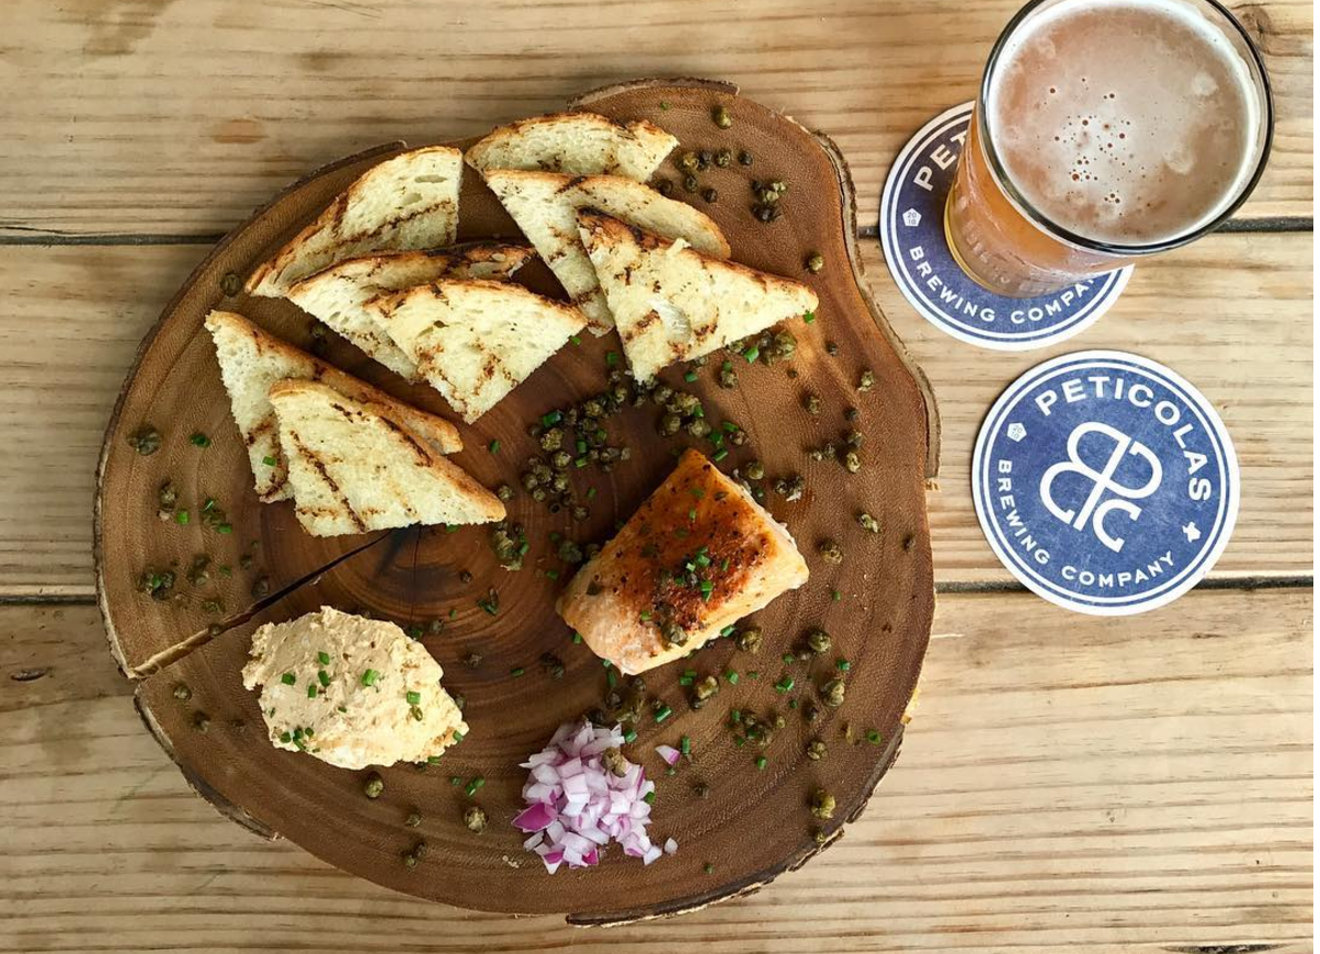 18th & Vine serves its adorable new summer special — a smoked salmon board with dill aioli, fried capers and grilled toast — on this rustic wooden circle. Count the rings for added dinner entertainment.